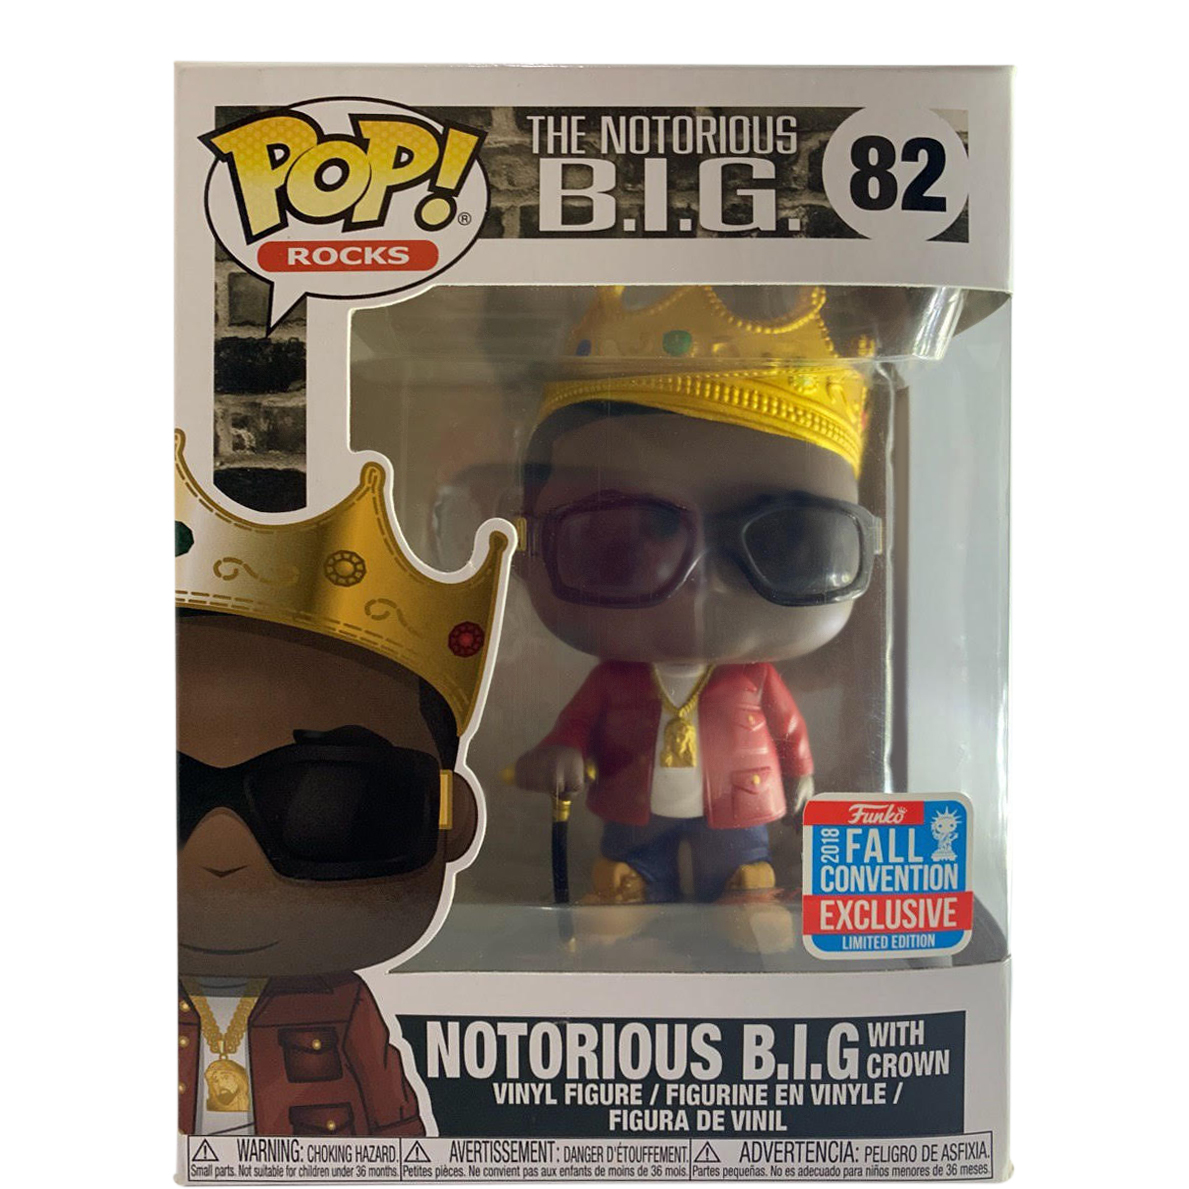 Vinyl with Crown Pop Notorious B.I.G - Notorious B.I.G 